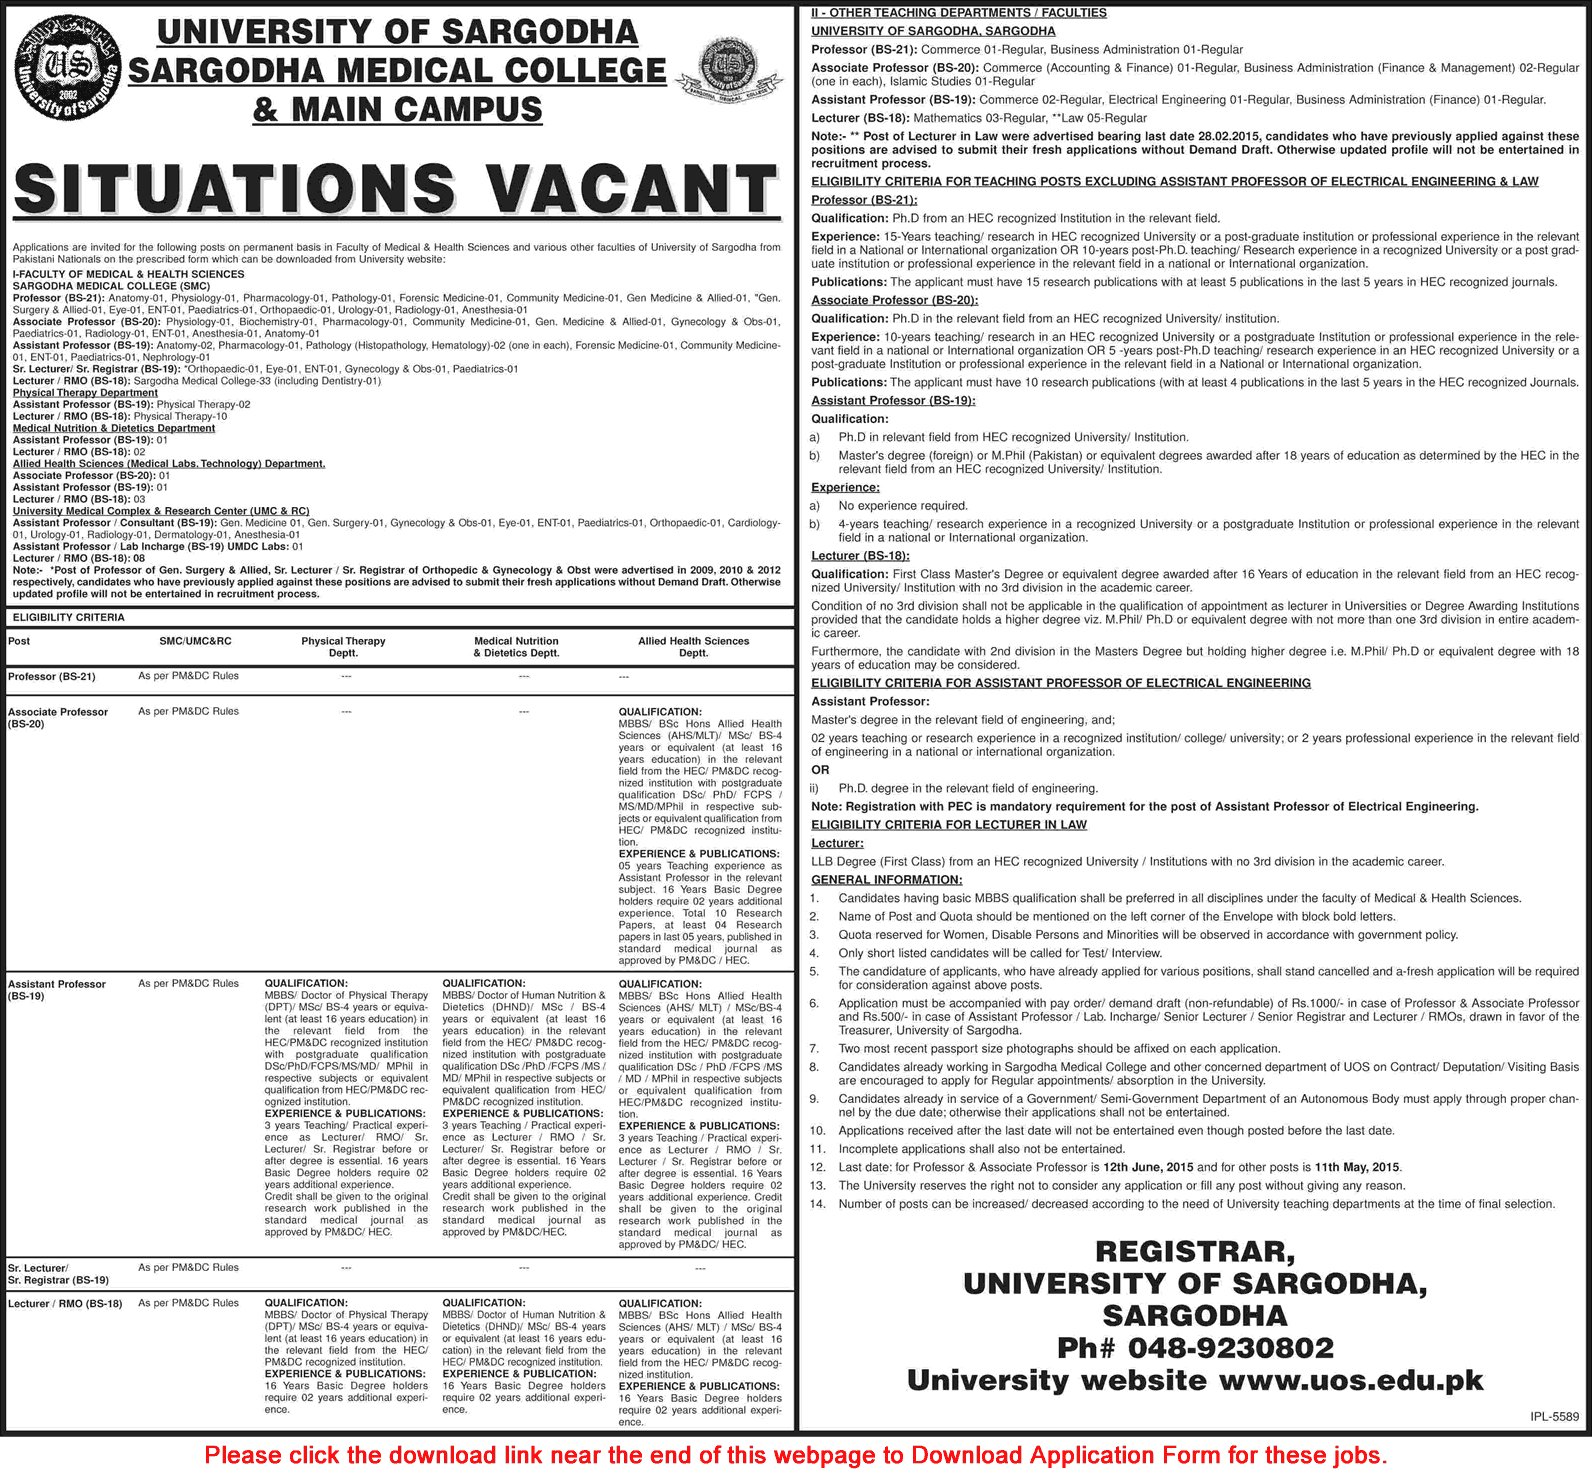 University of Sargodha Jobs 2015 May Medical College Application Form Download Teaching Faculty